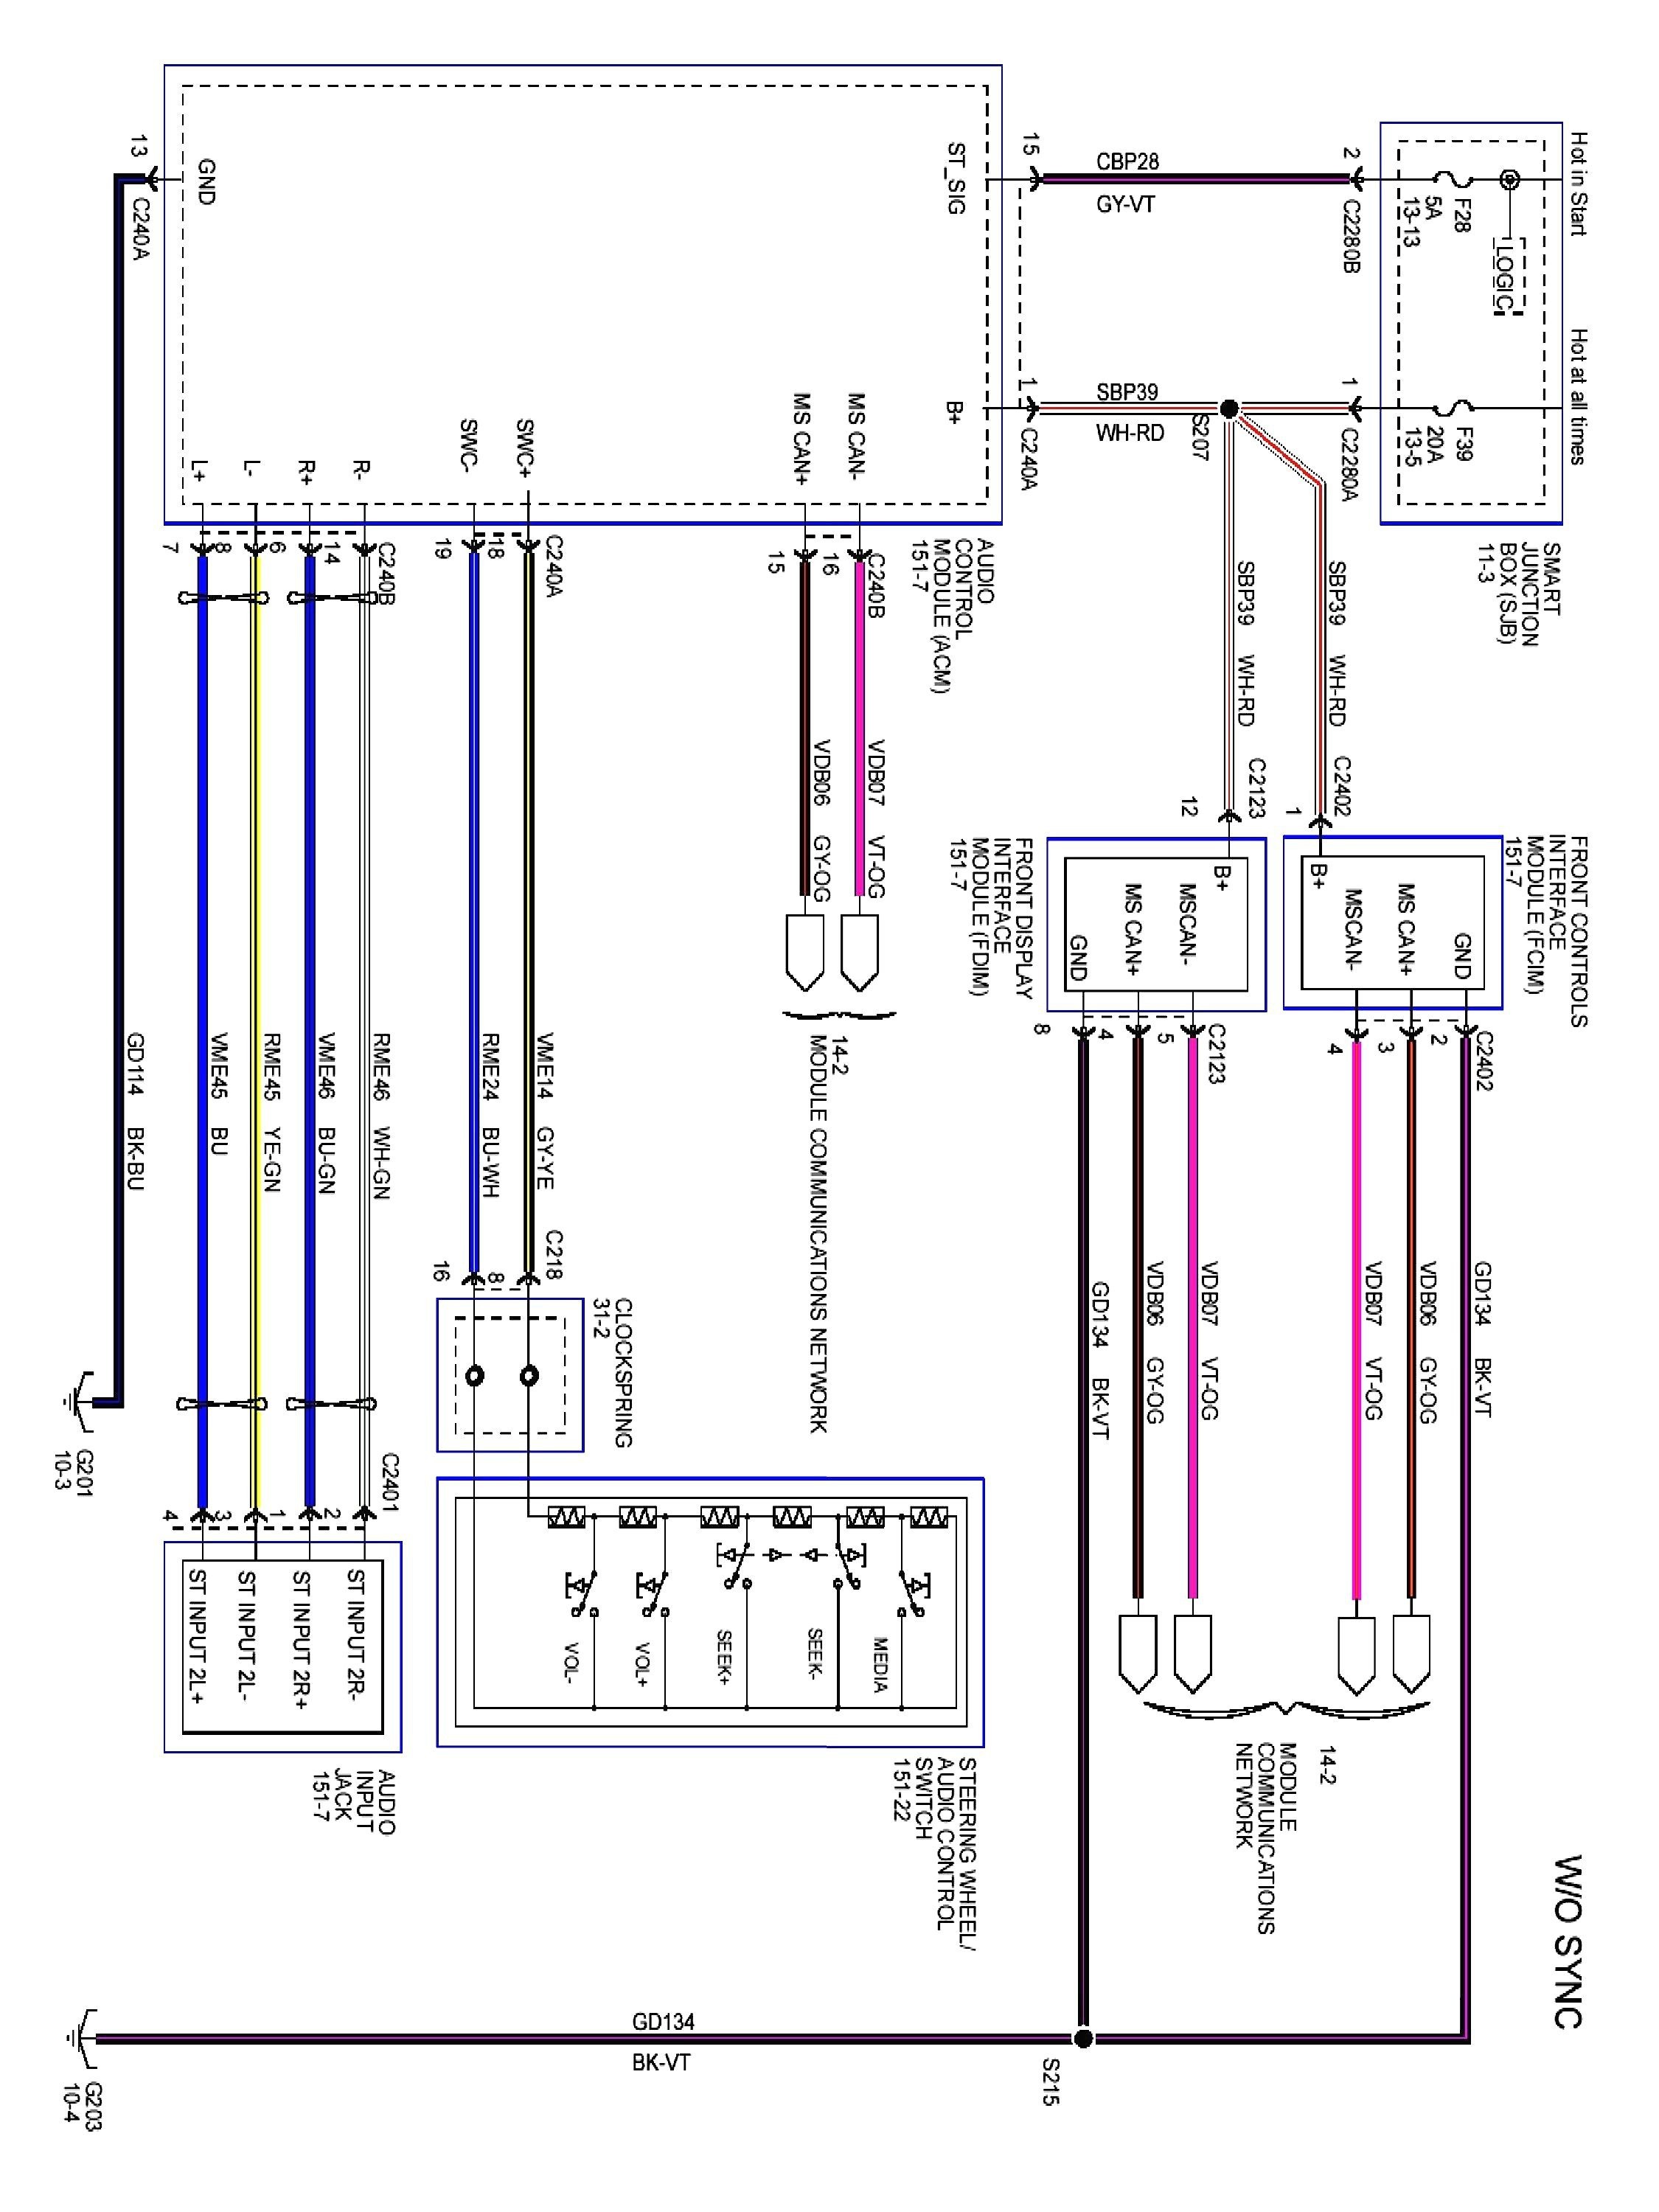 Awesome Tcs Wiring Diagram s Electrical and Wiring Diagram